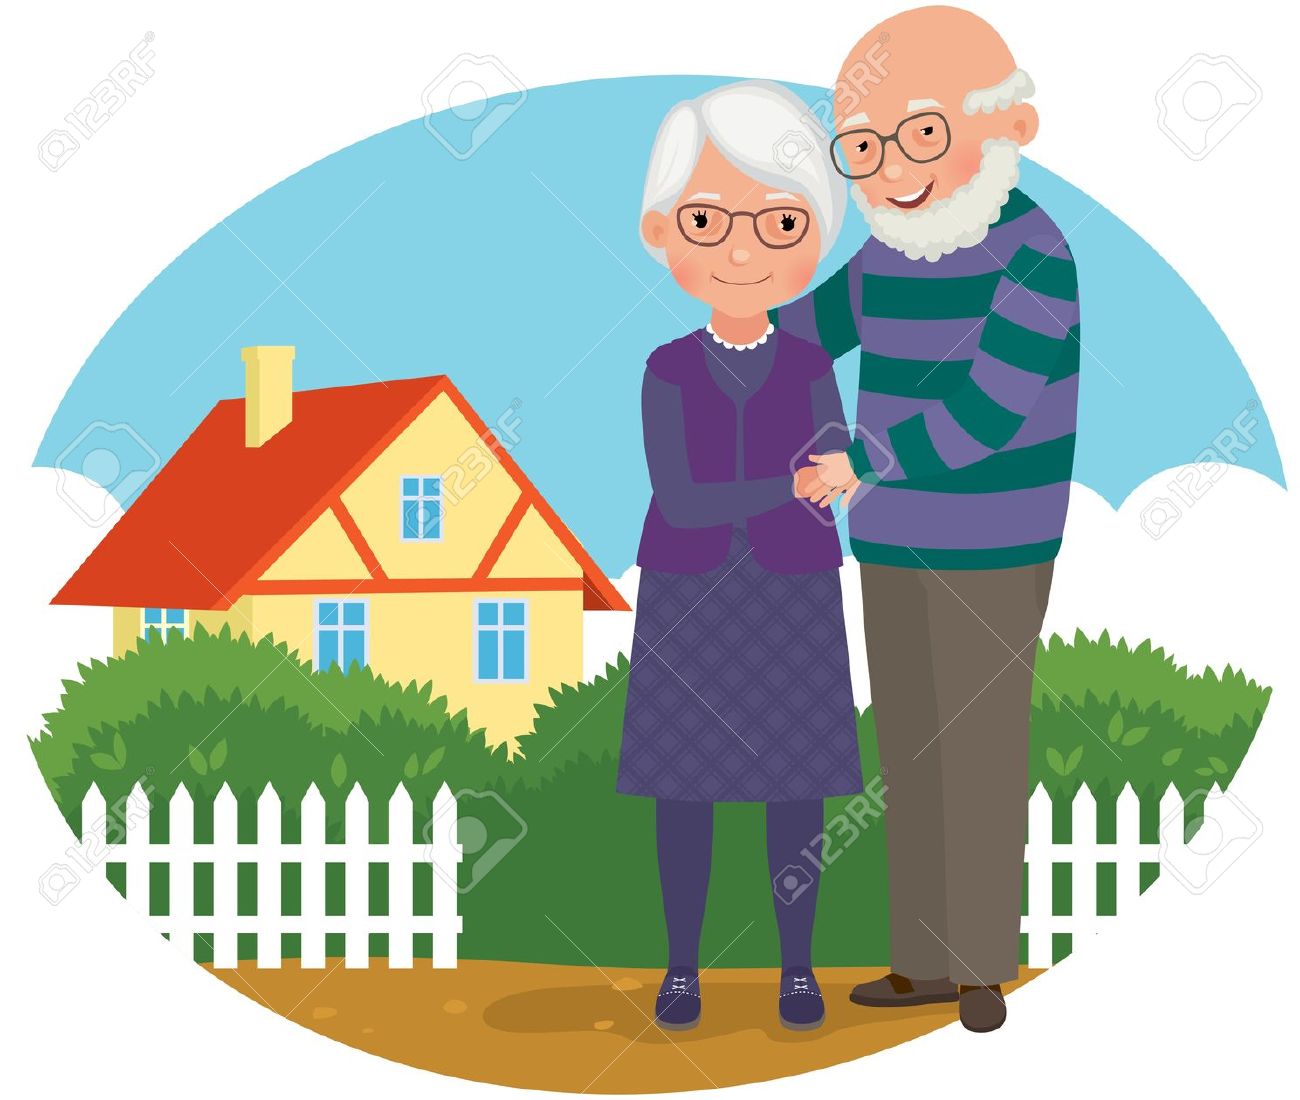 Grandparents clipart old age home. Station 